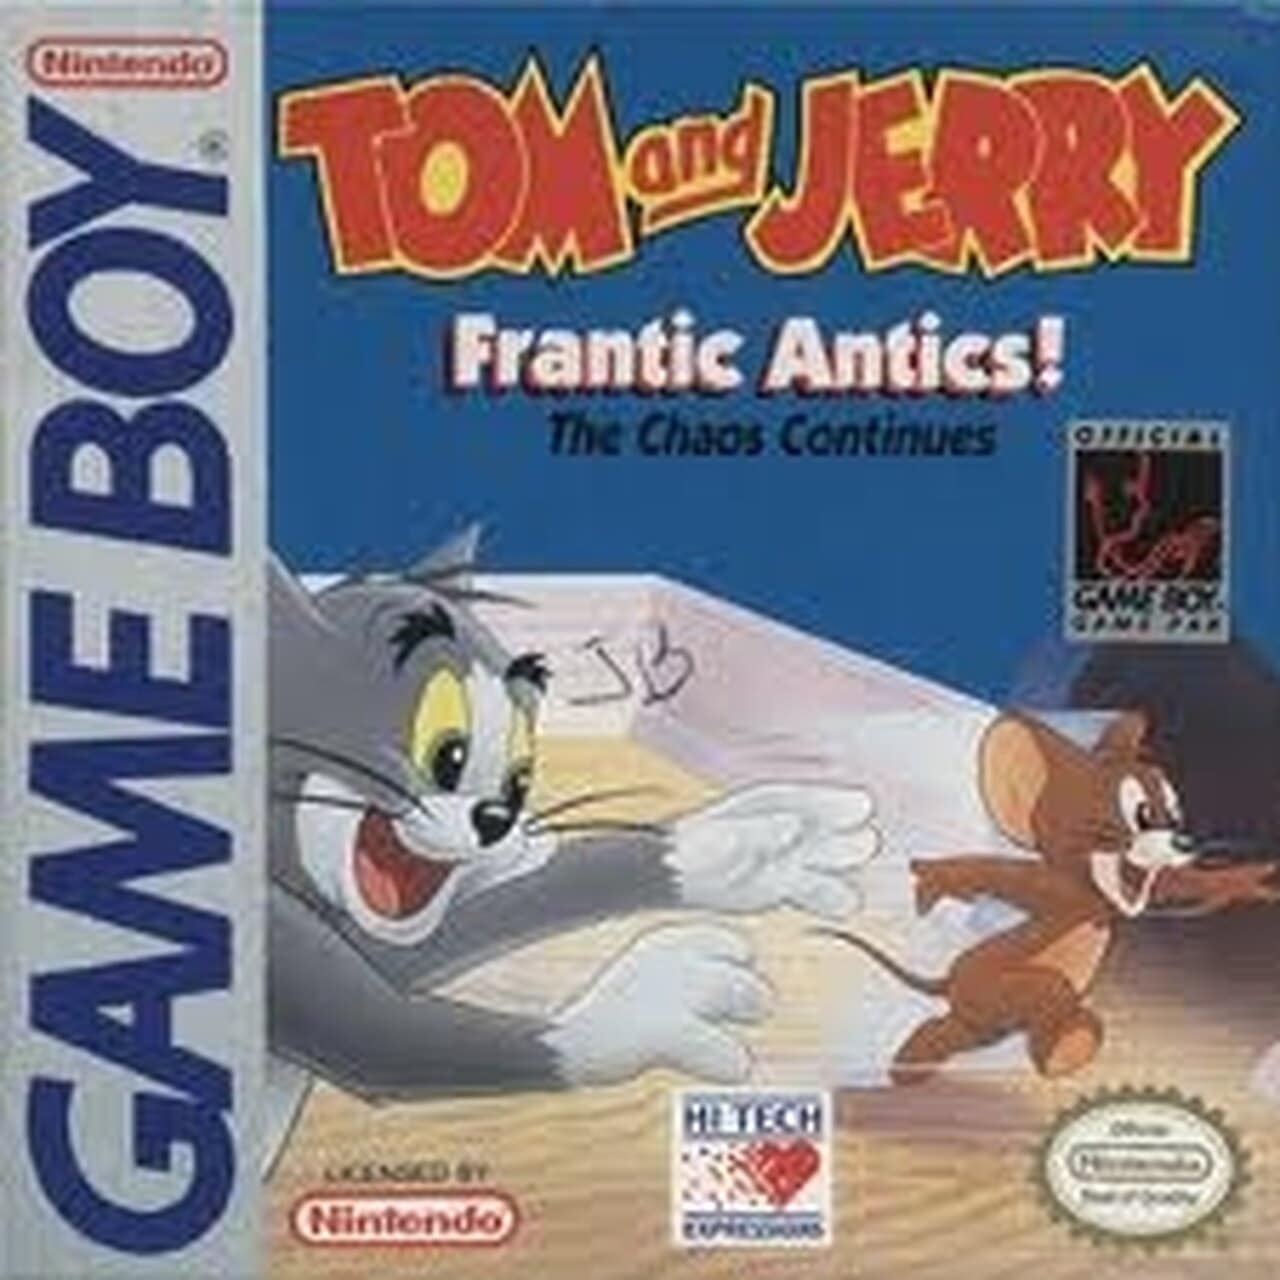 Tom and Jerry: Frantic Antics player count stats